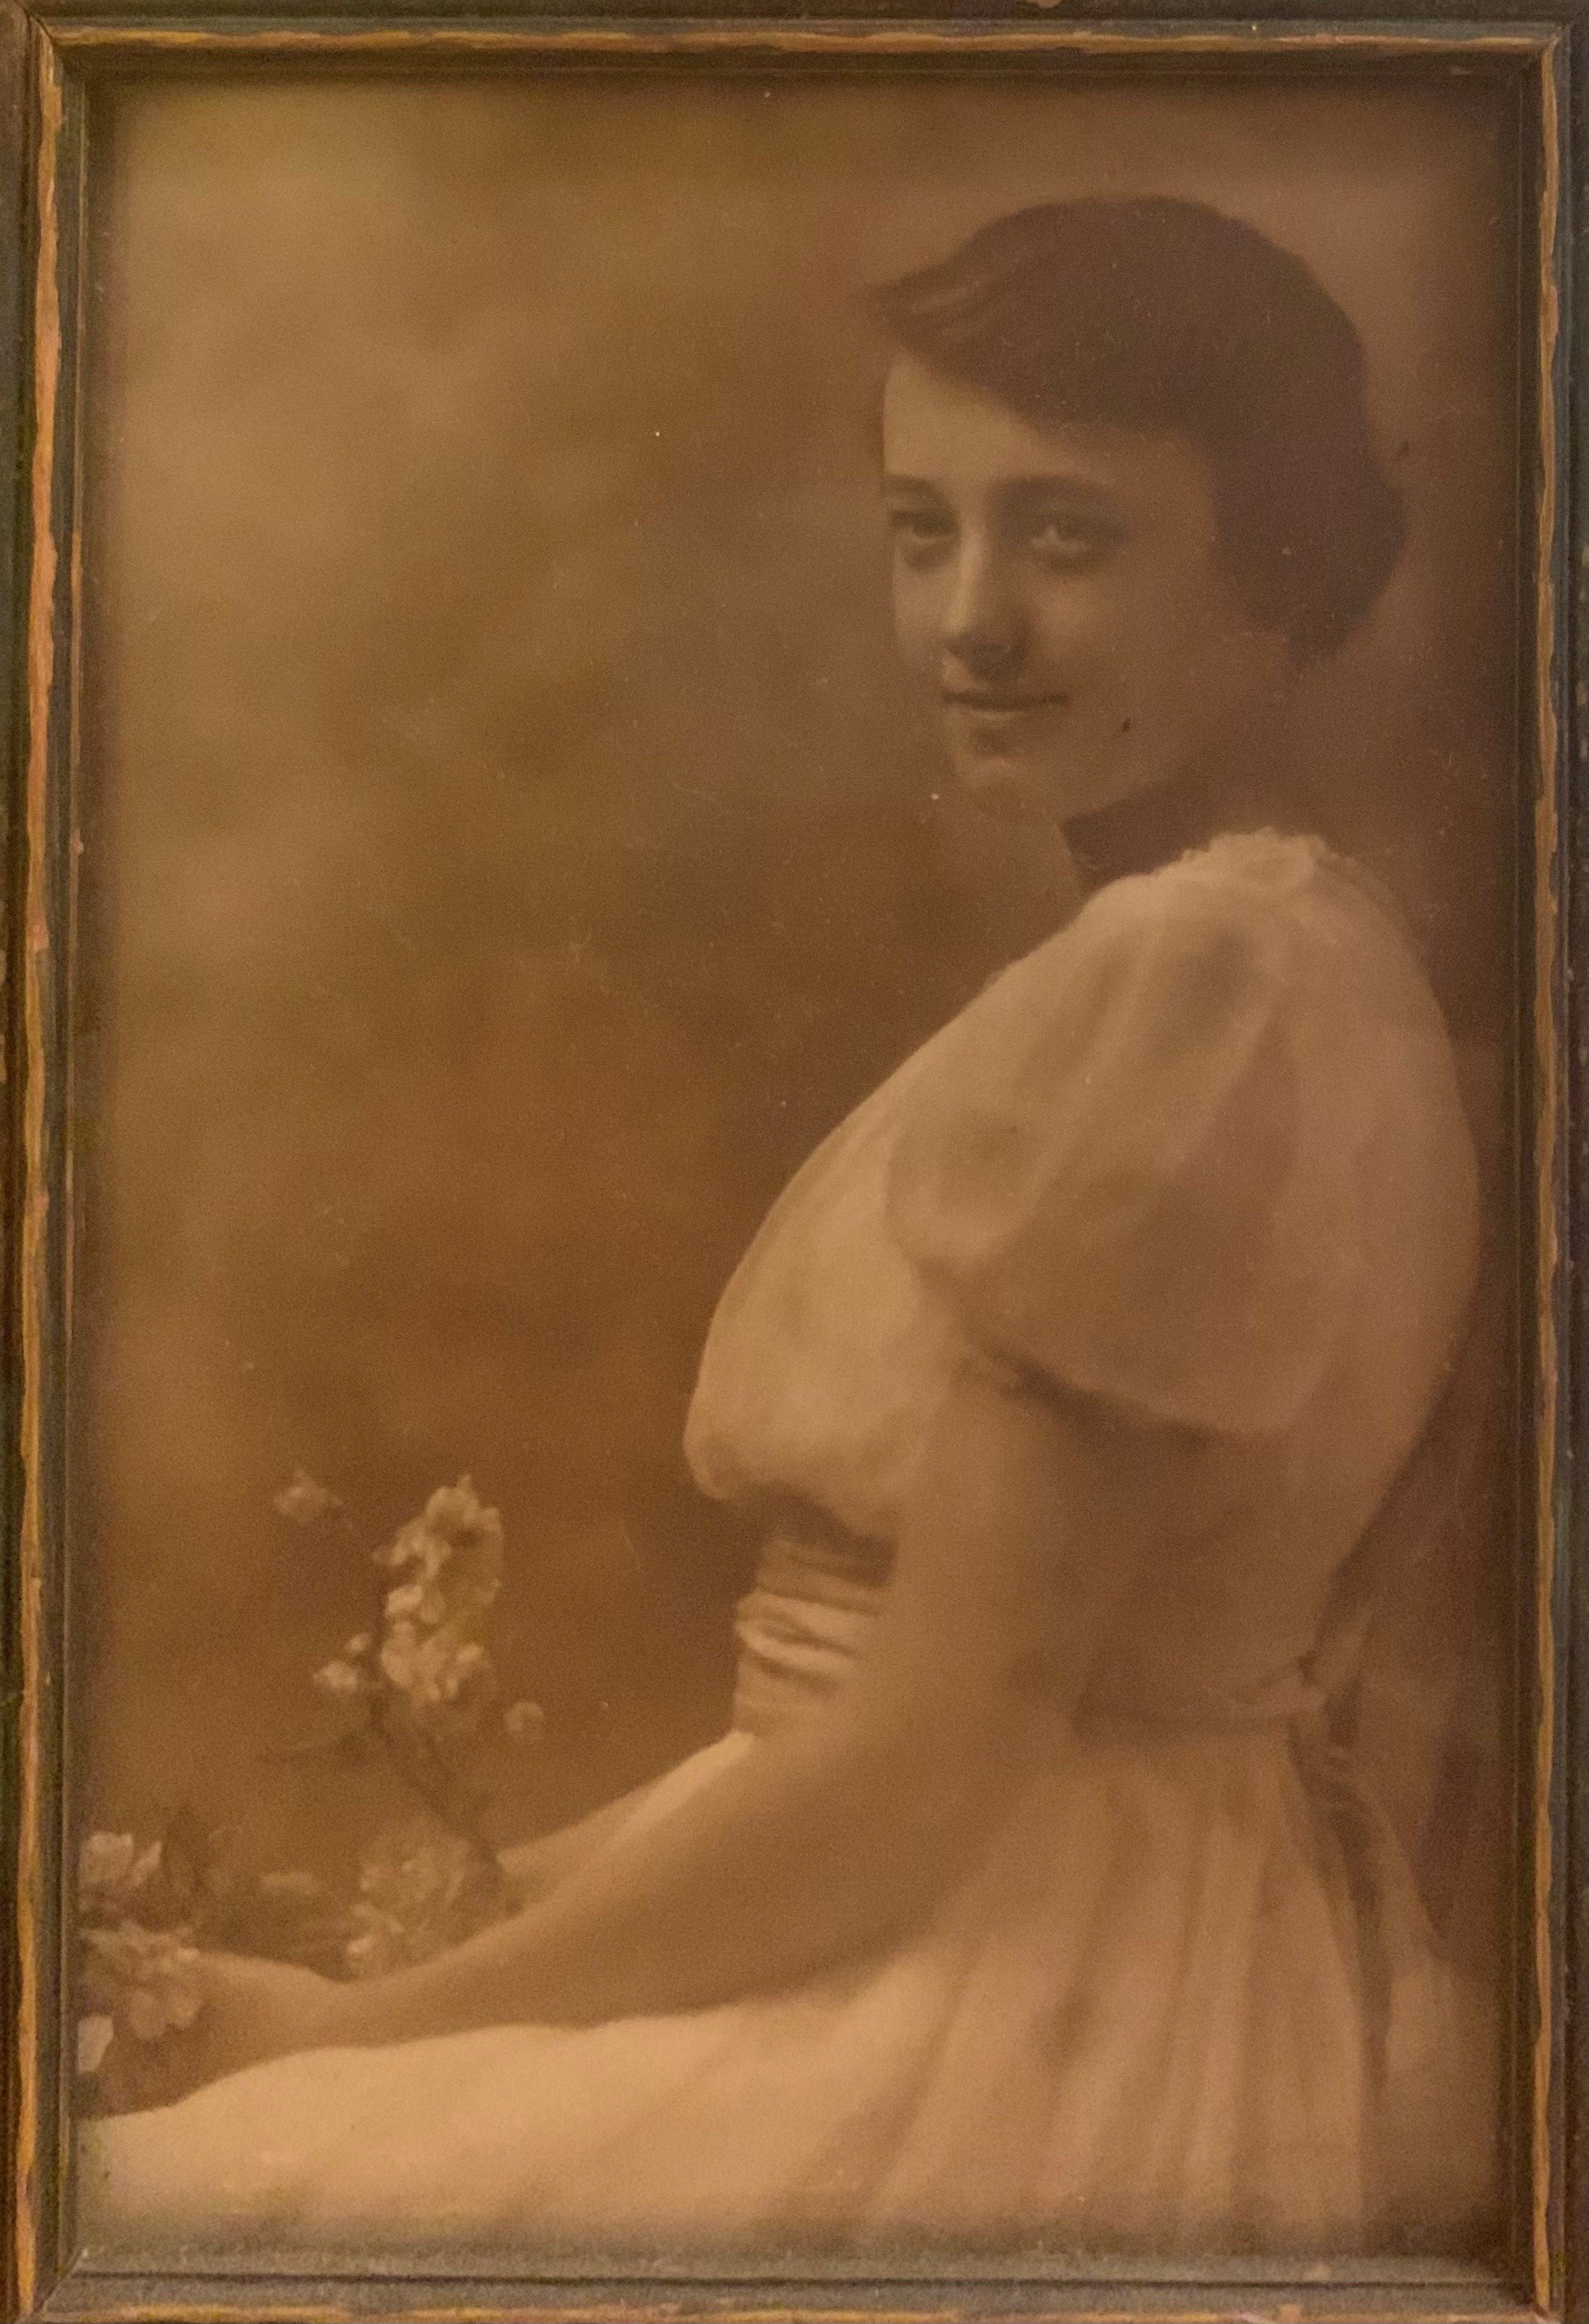 A portrait of the author's great-grandmother when she was a young nurse.